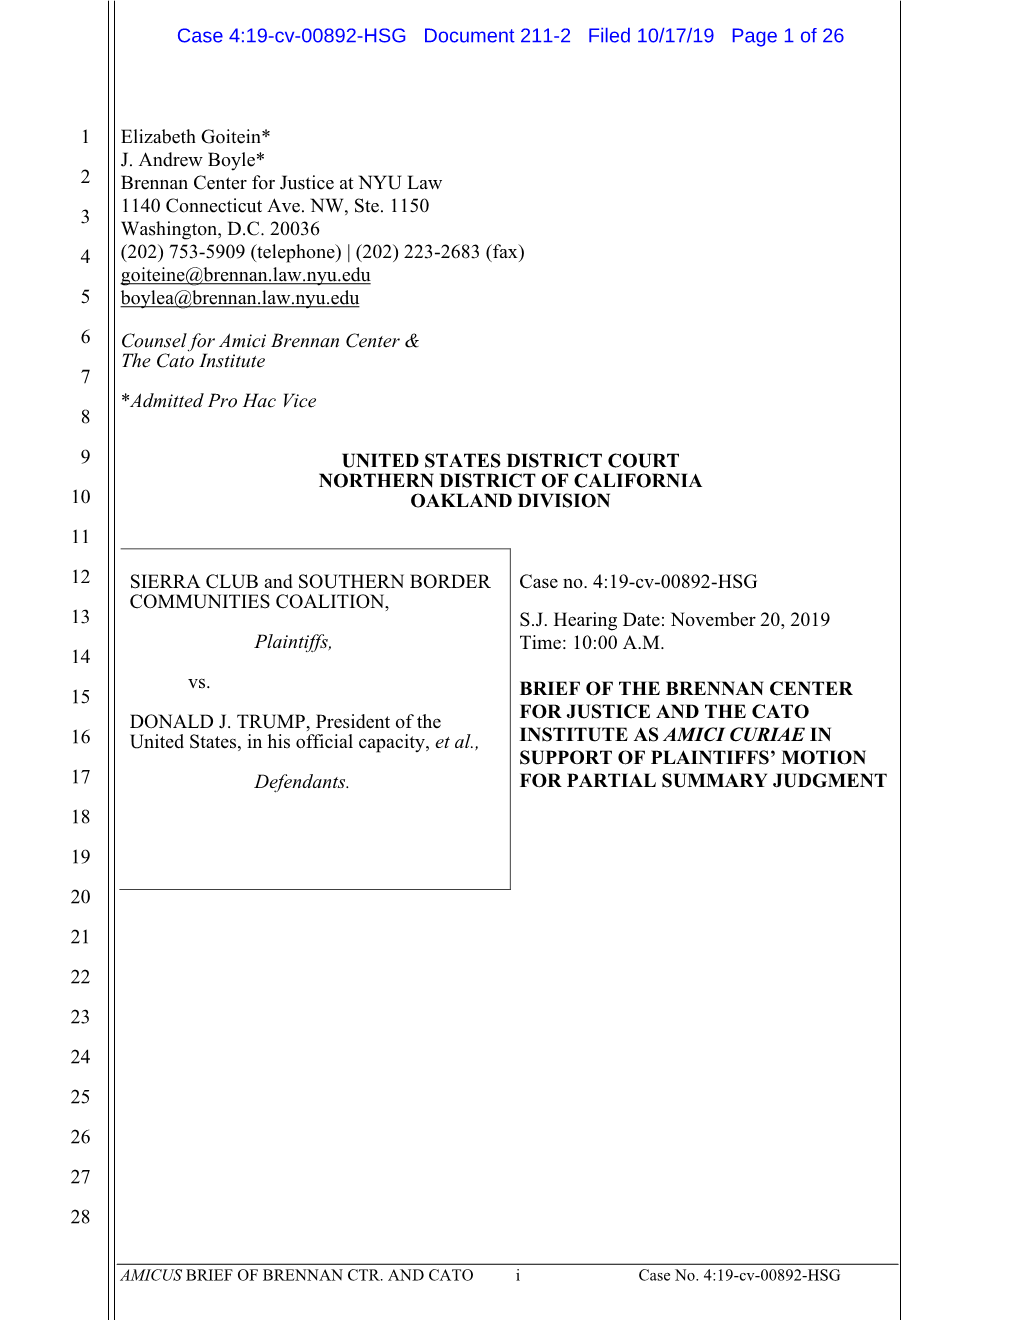 Case 4:19-Cv-00892-HSG Document 211-2 Filed 10/17/19 Page 1 of 26